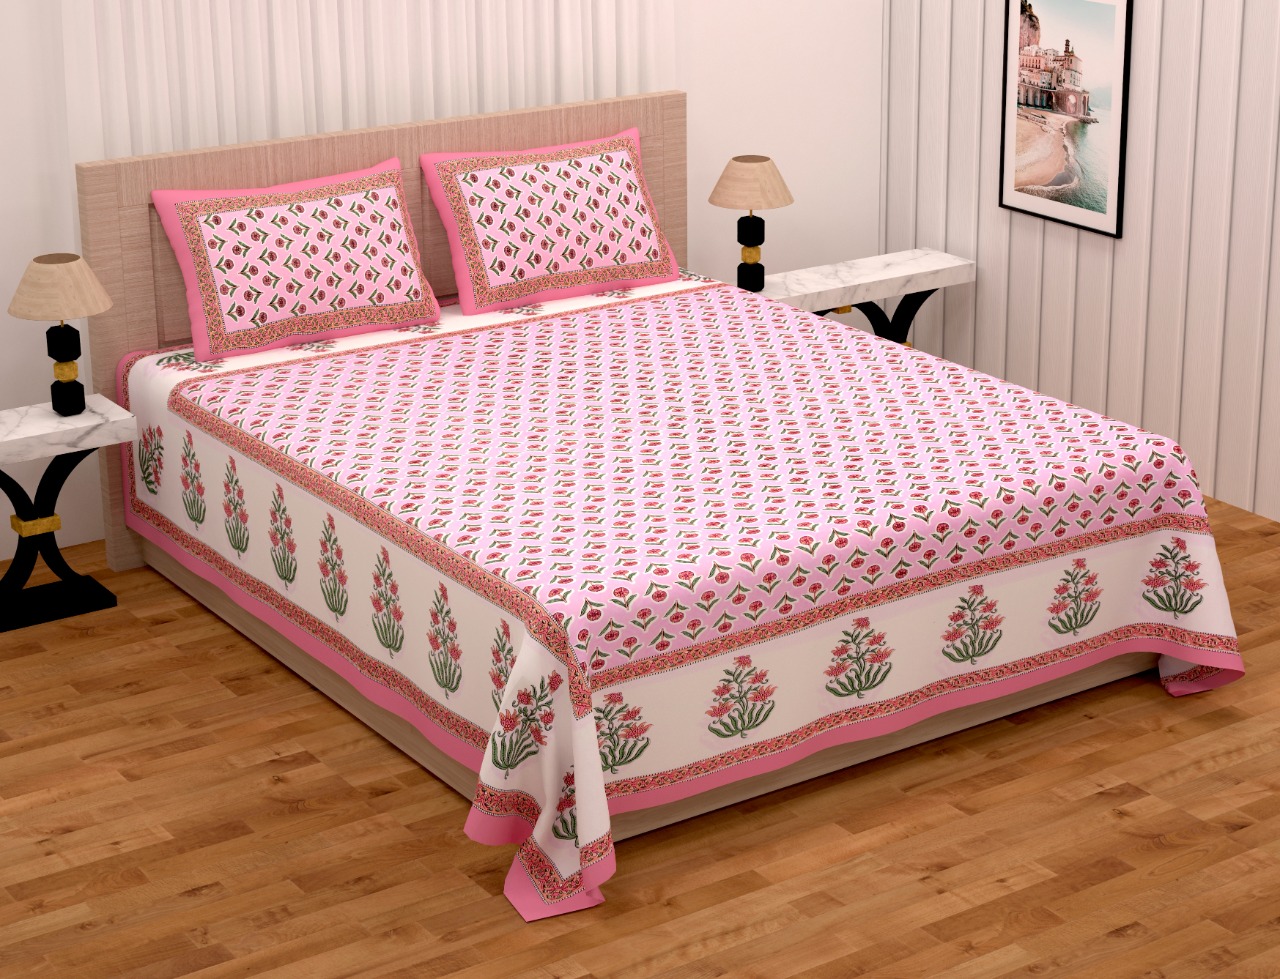 king size double bed sheet